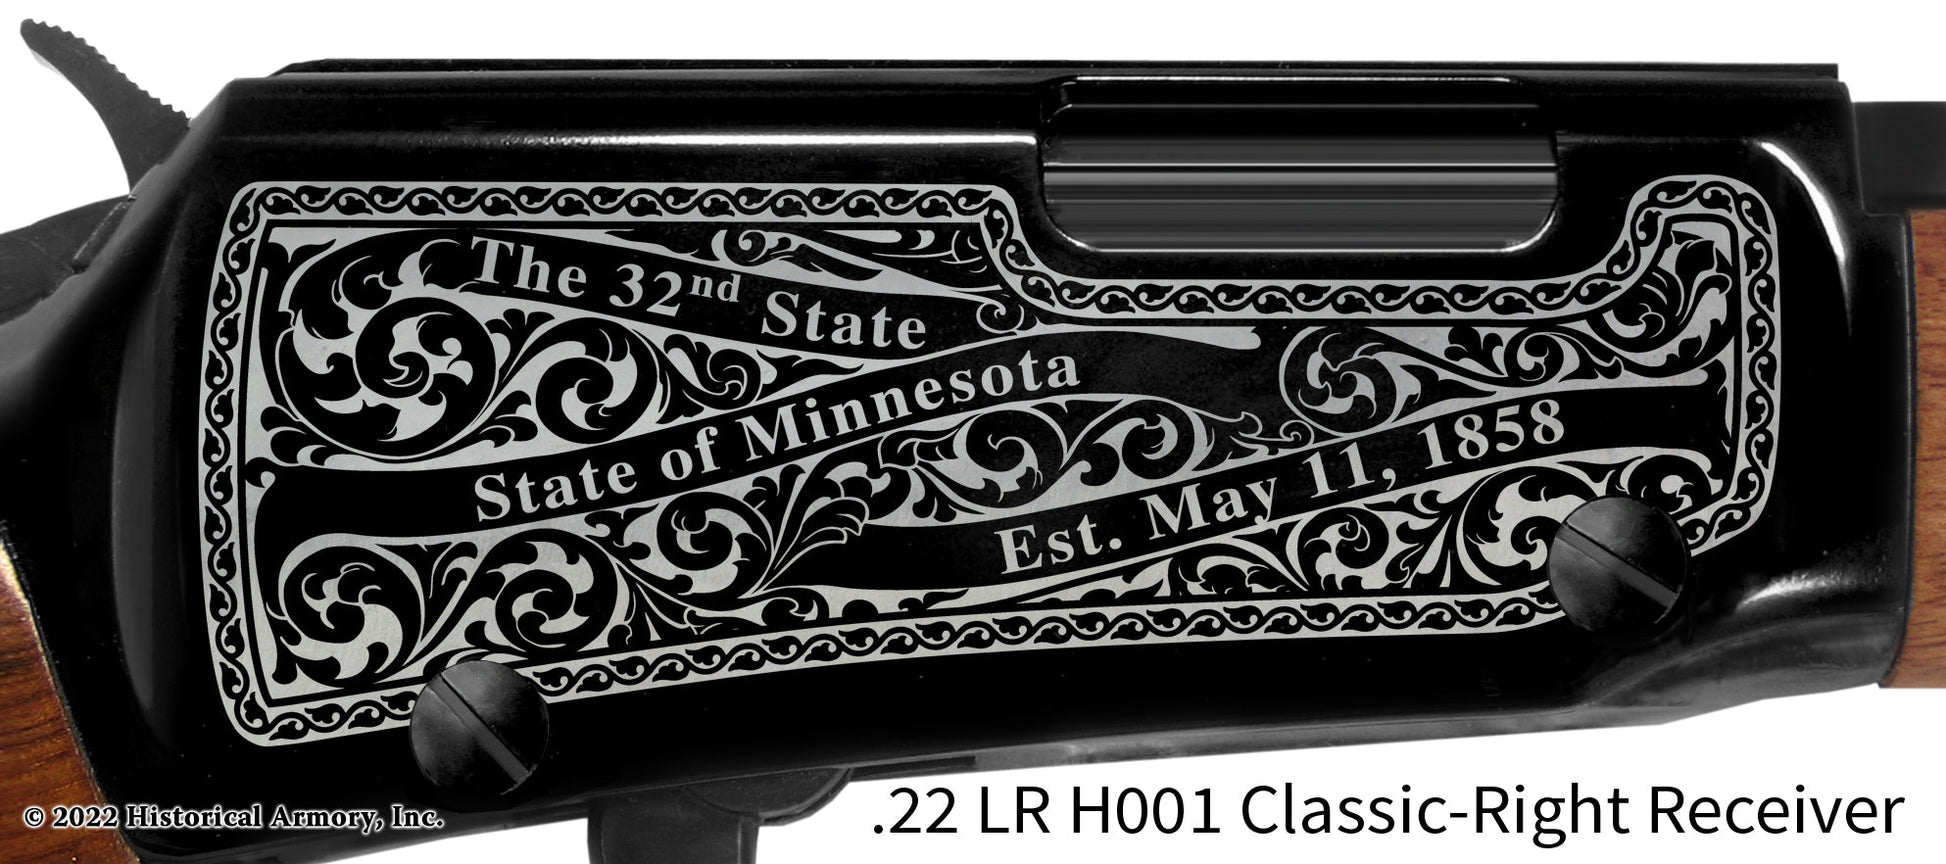 Stearns County Minnesota Engraved Henry H001 Rifle